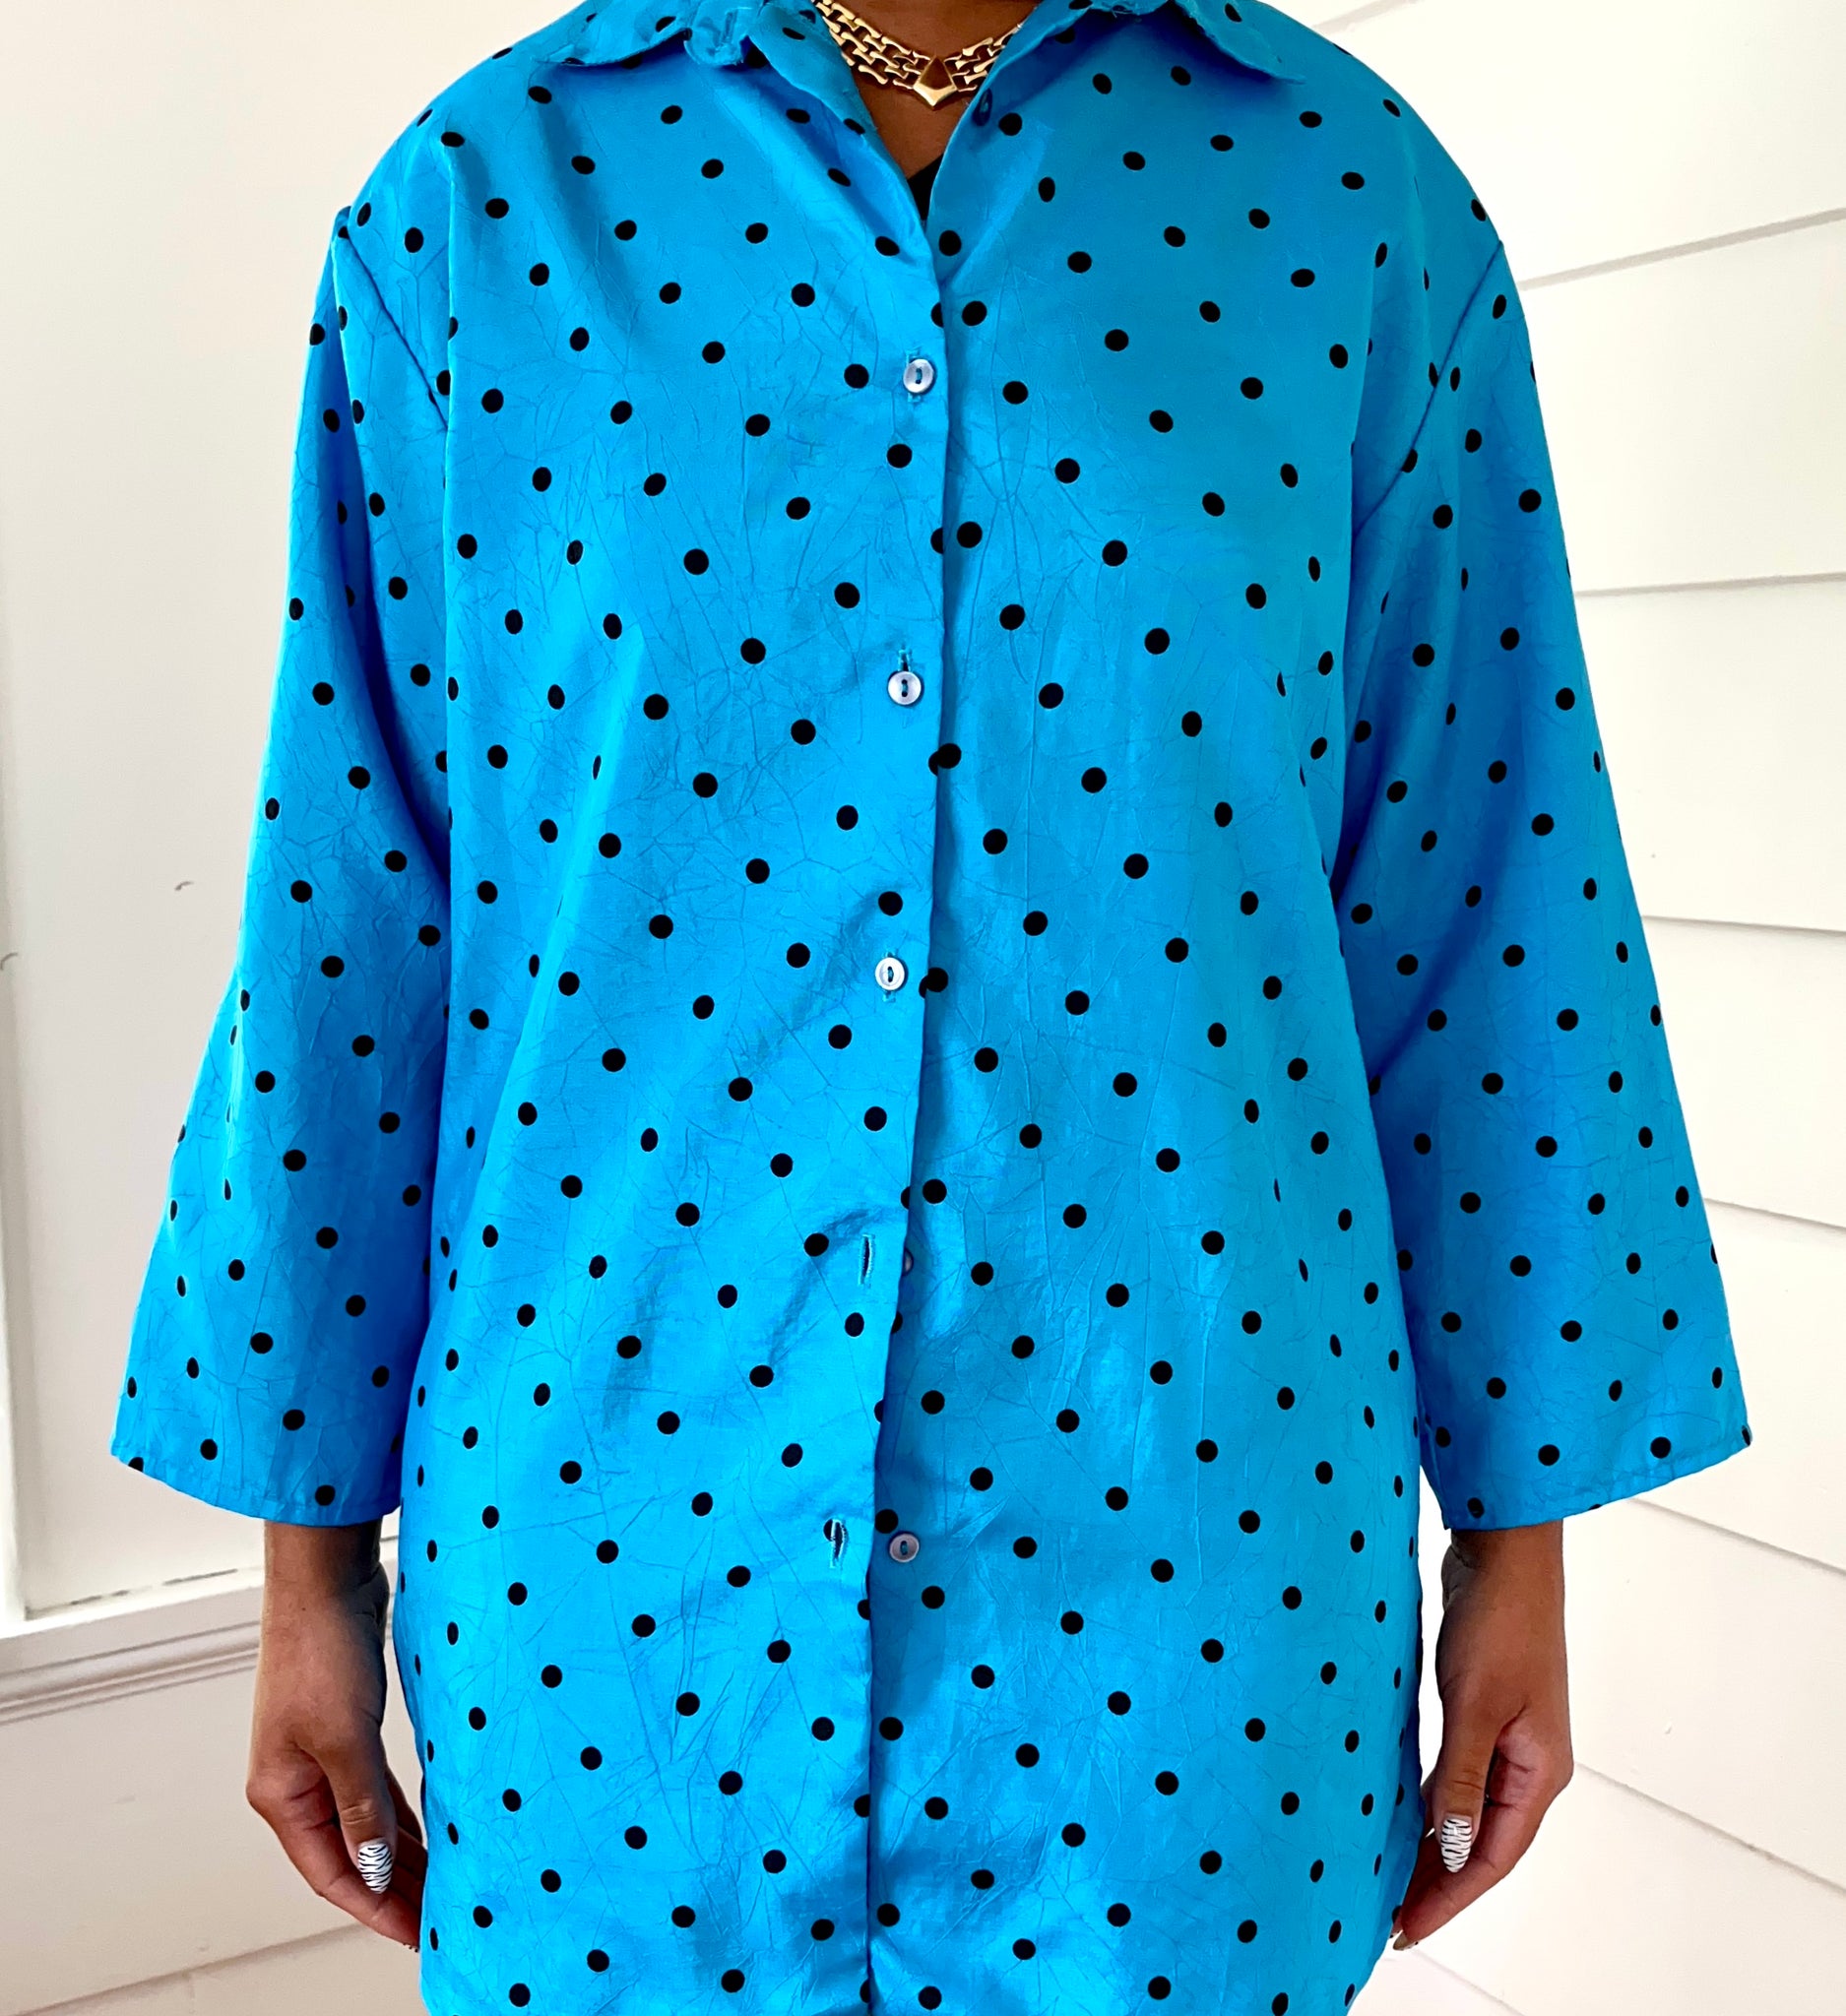 Polkadot VTG Top (New Arrival - Size Large/Extra Large)